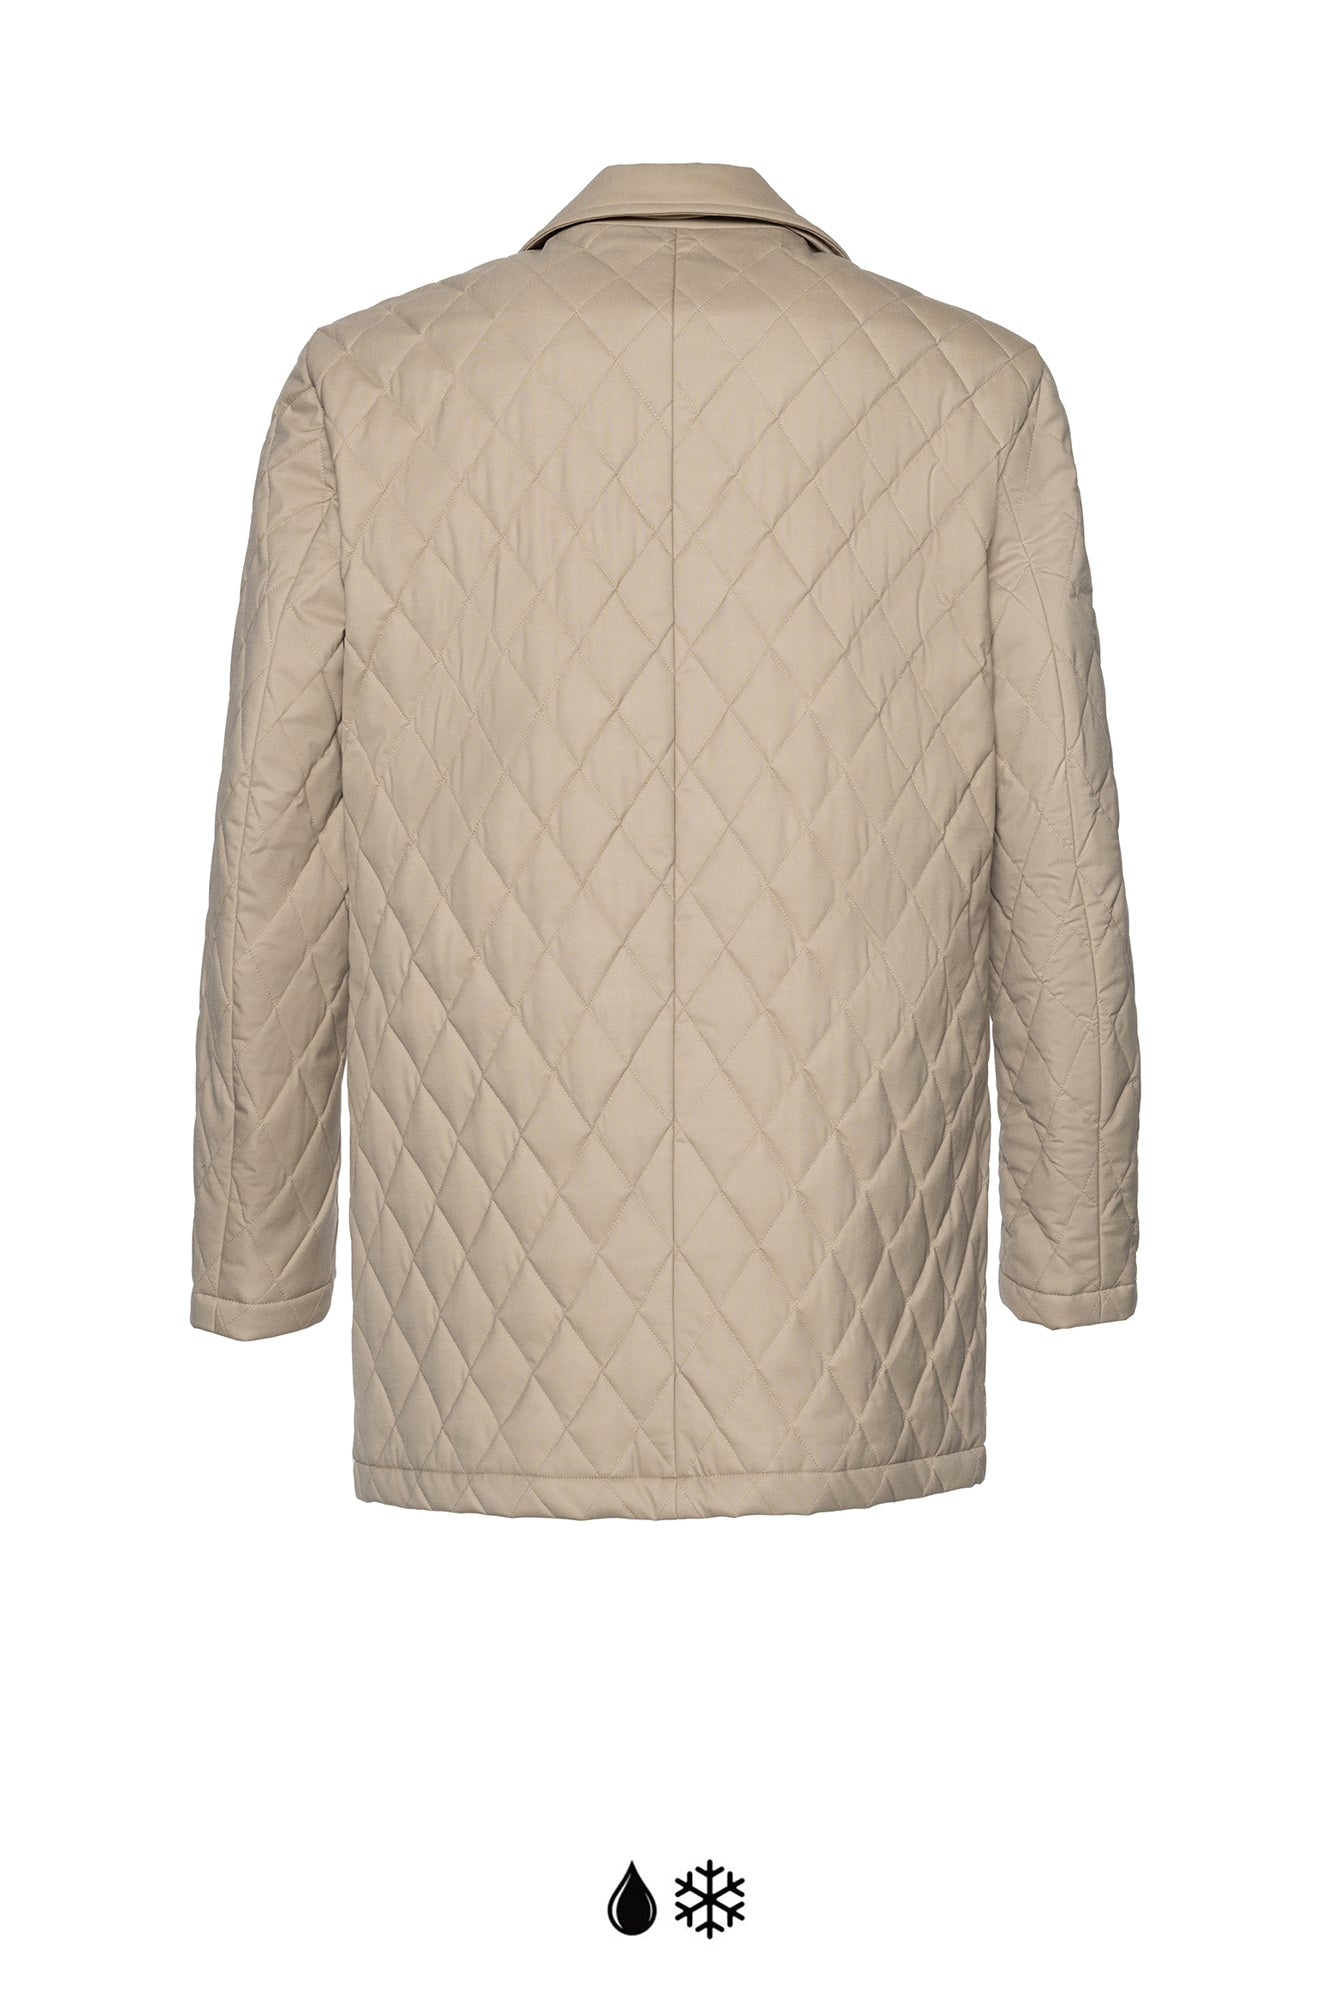 BYRON TAN DIAMOND QUILTED CARCOAT 33.5 inch in length